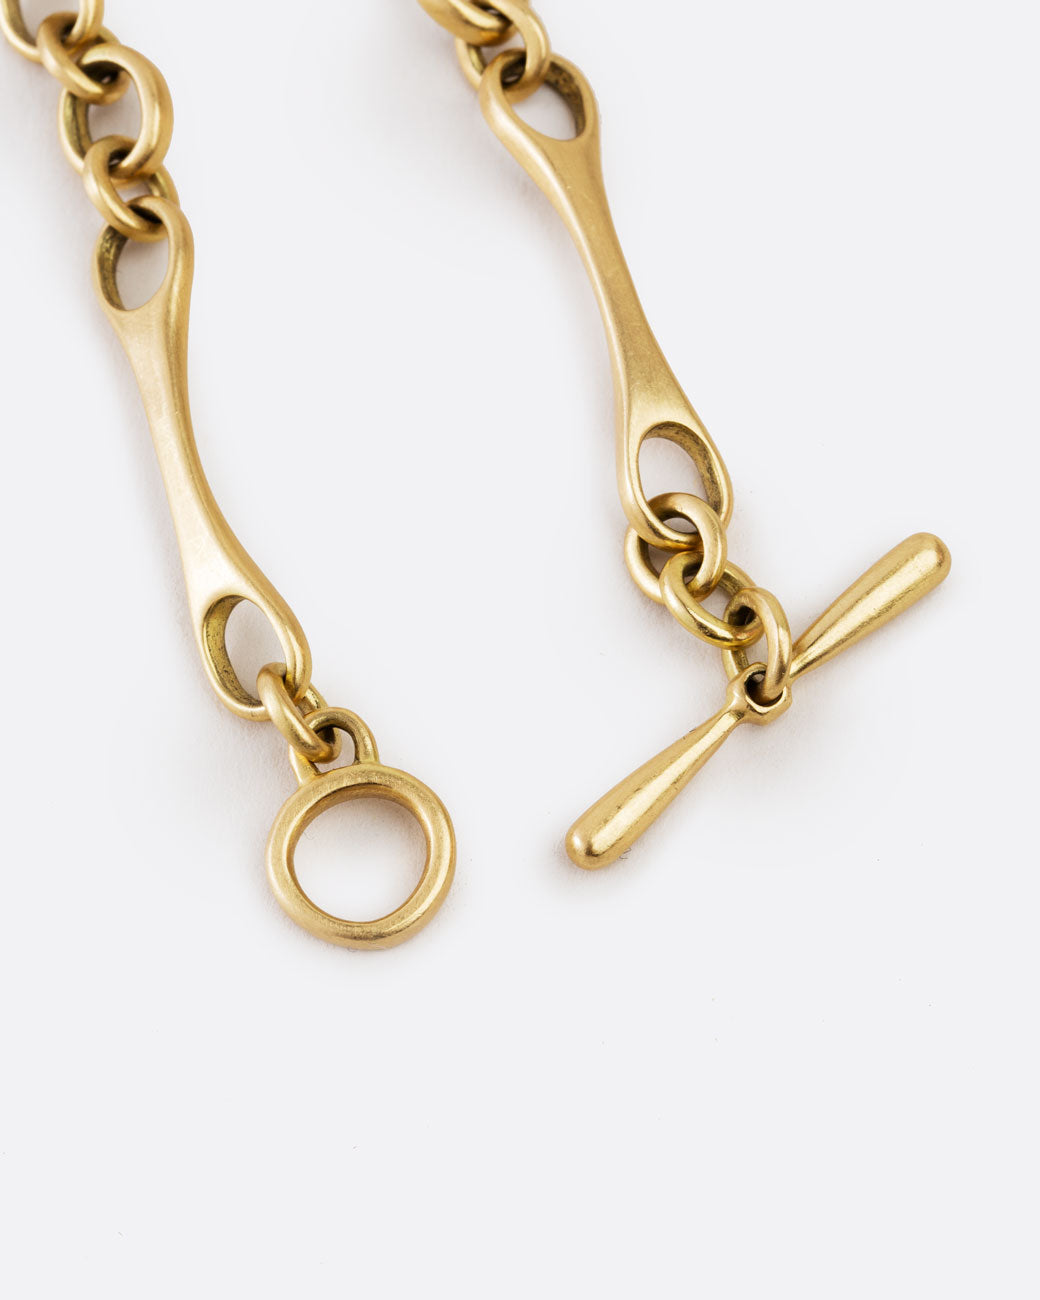 close up of the toggle clasp on the matte gold bracelet